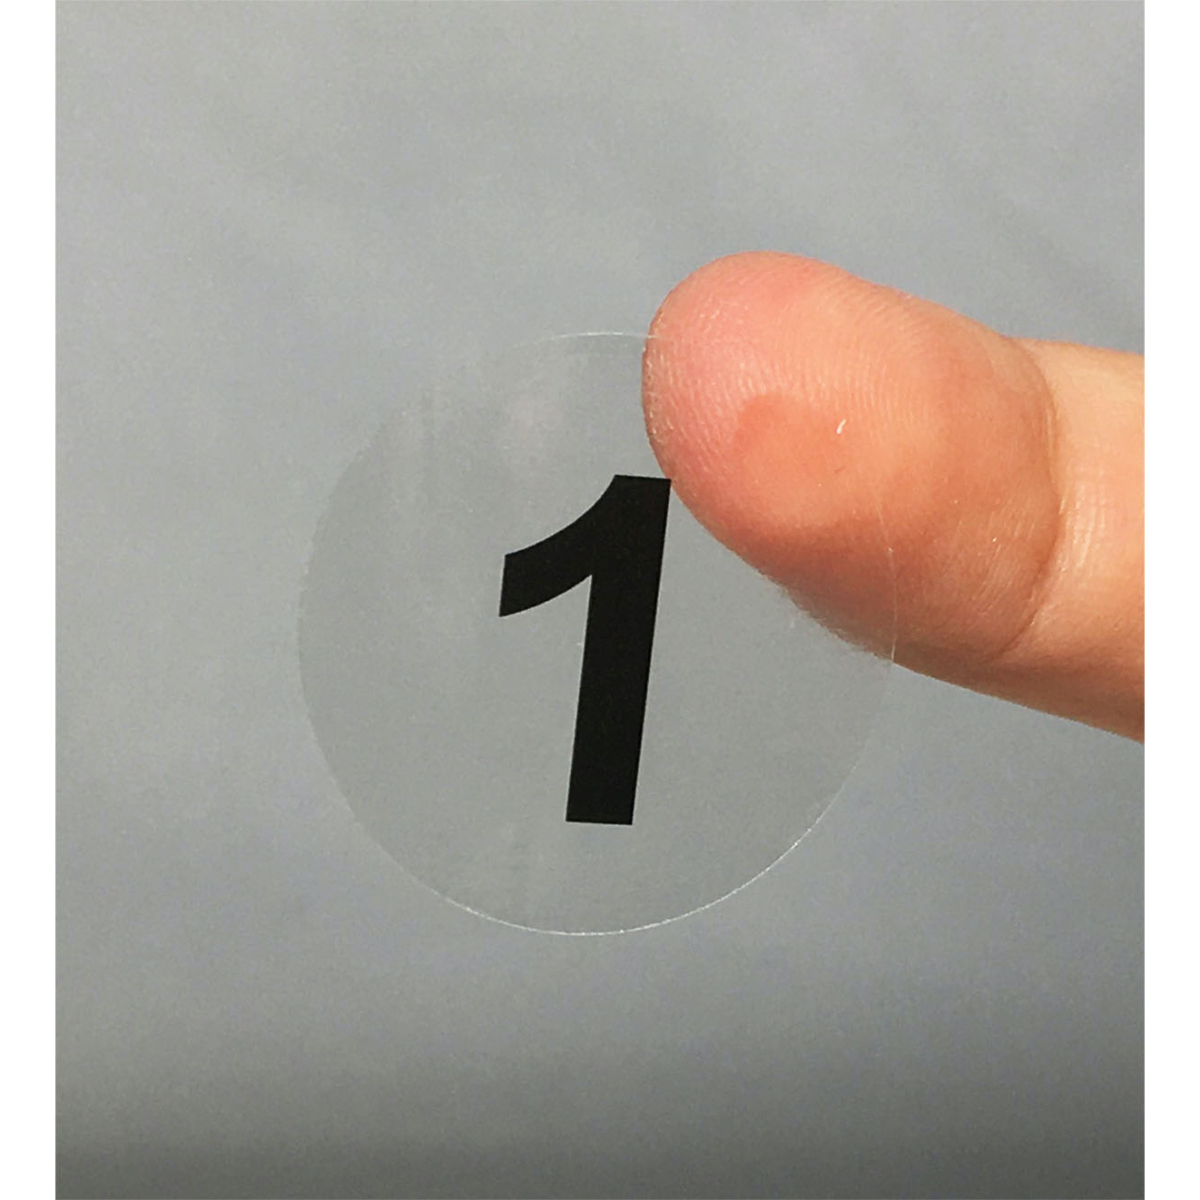 Ultra Clear Consecutive Number 1-10 Stickers | 1 inch inch - 1-10, 50 Sets - 500 Pack 